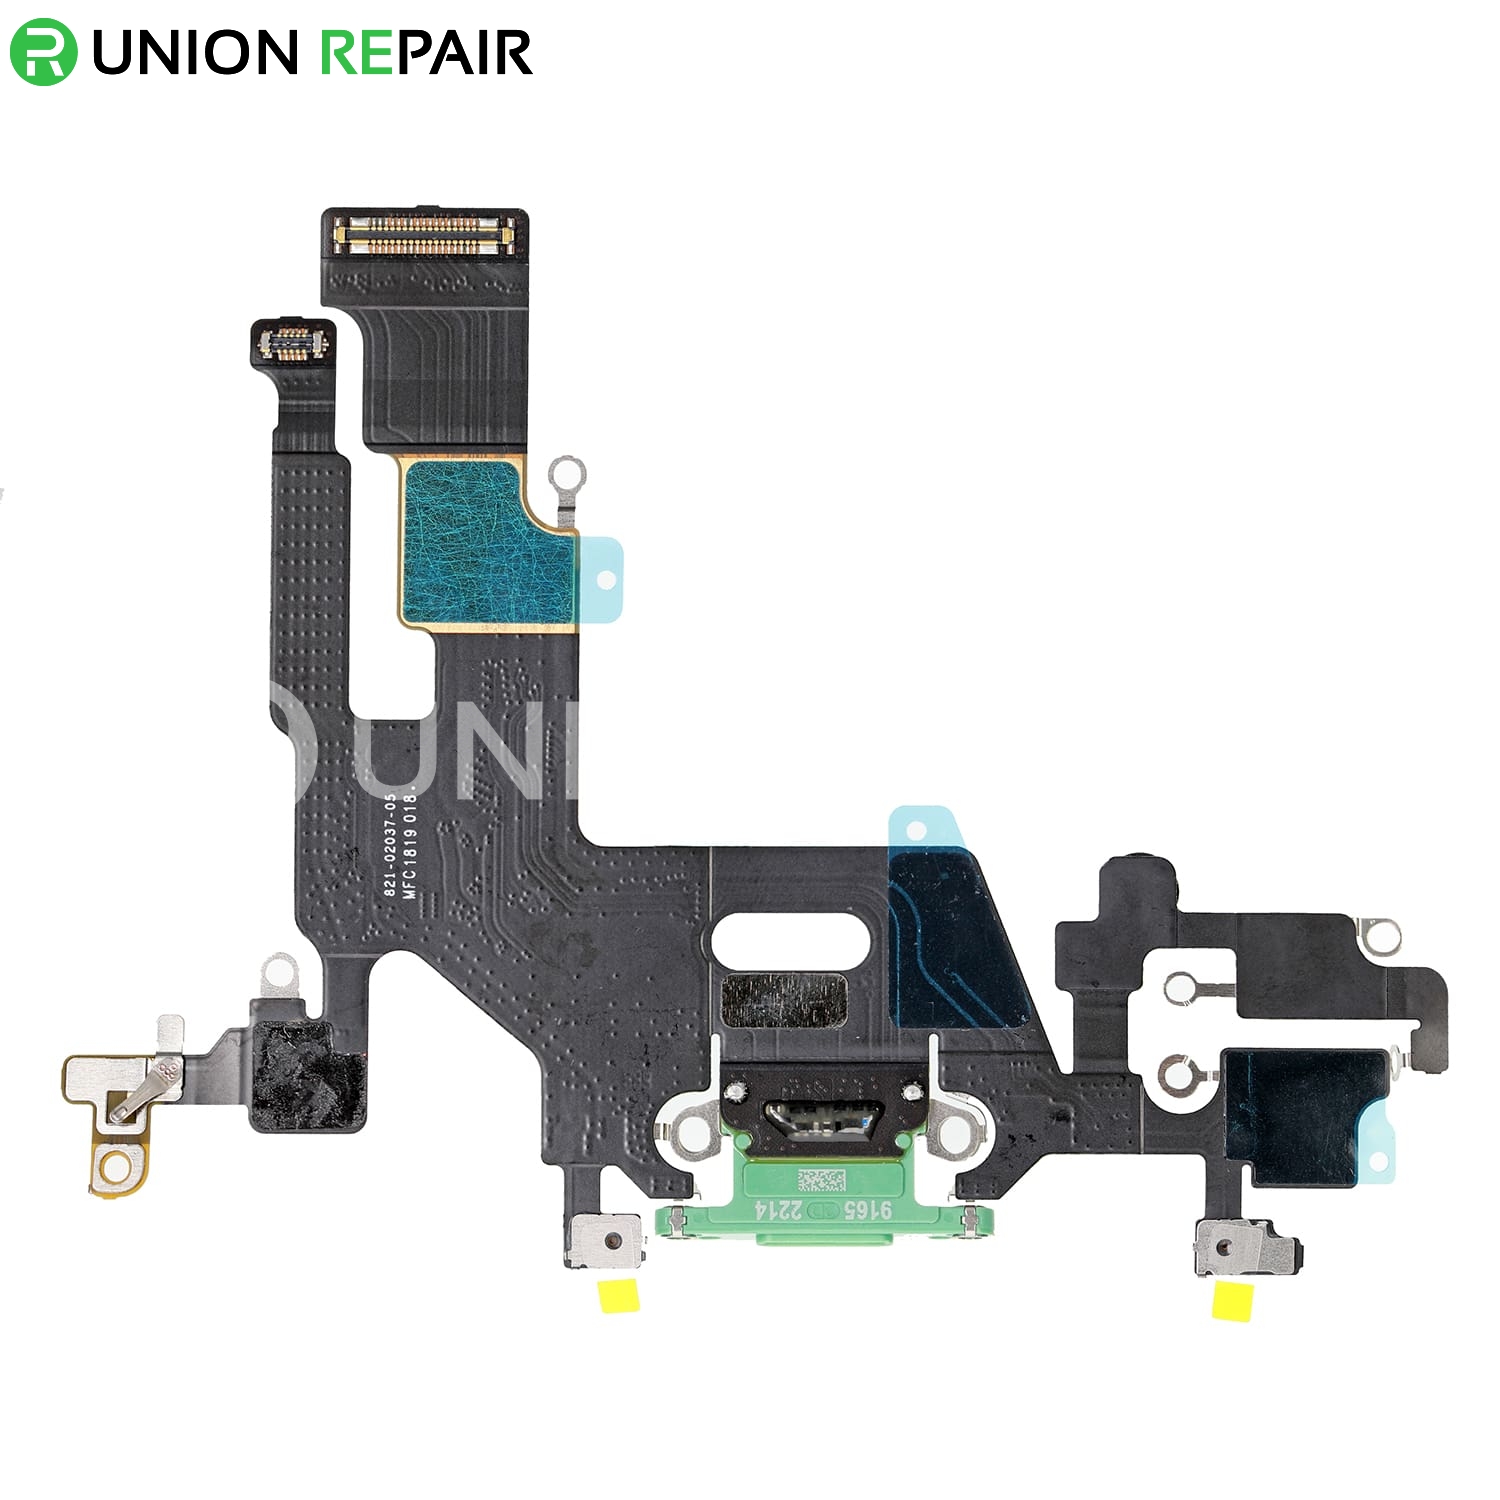 https://images.unionrepair.com/images/watermarked/1/detailed/64/19795-replacement-for-iphone-11-usb-charging-flex-cable-green-1.jpg?t=1701256303